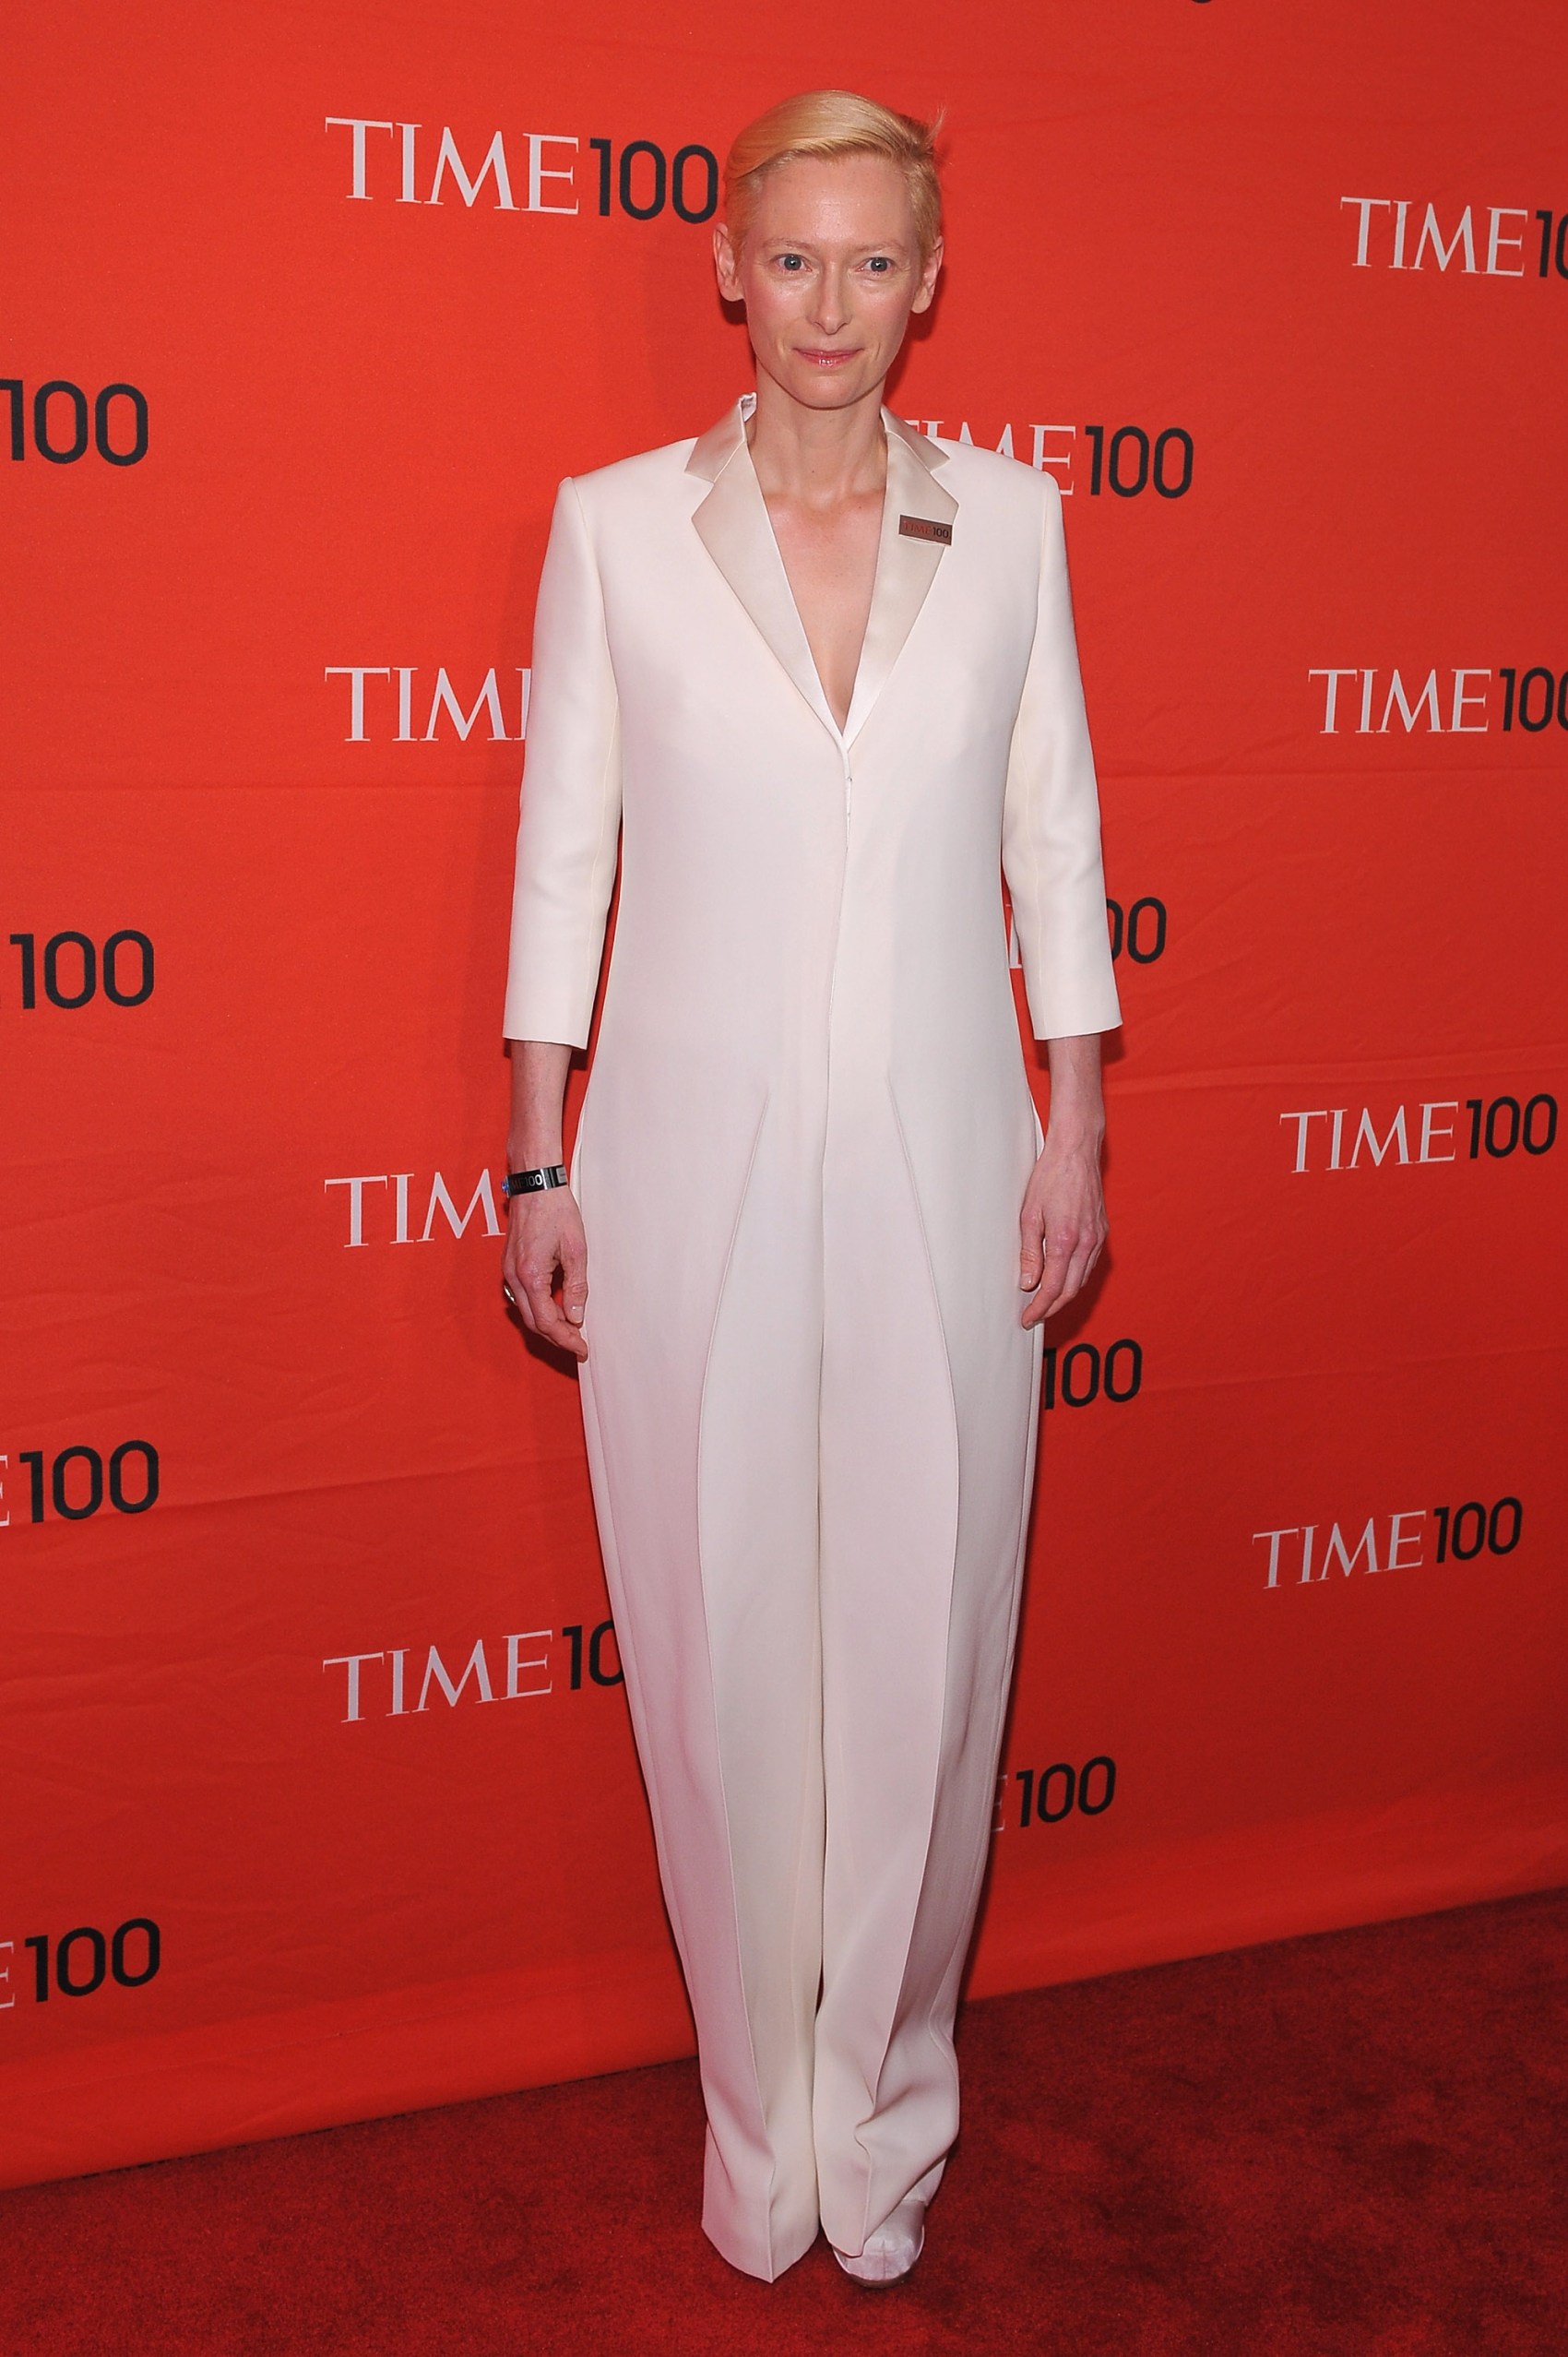 TIME 100 Gala, TIME'S 100 Most Influential People In The World - Red Carpet